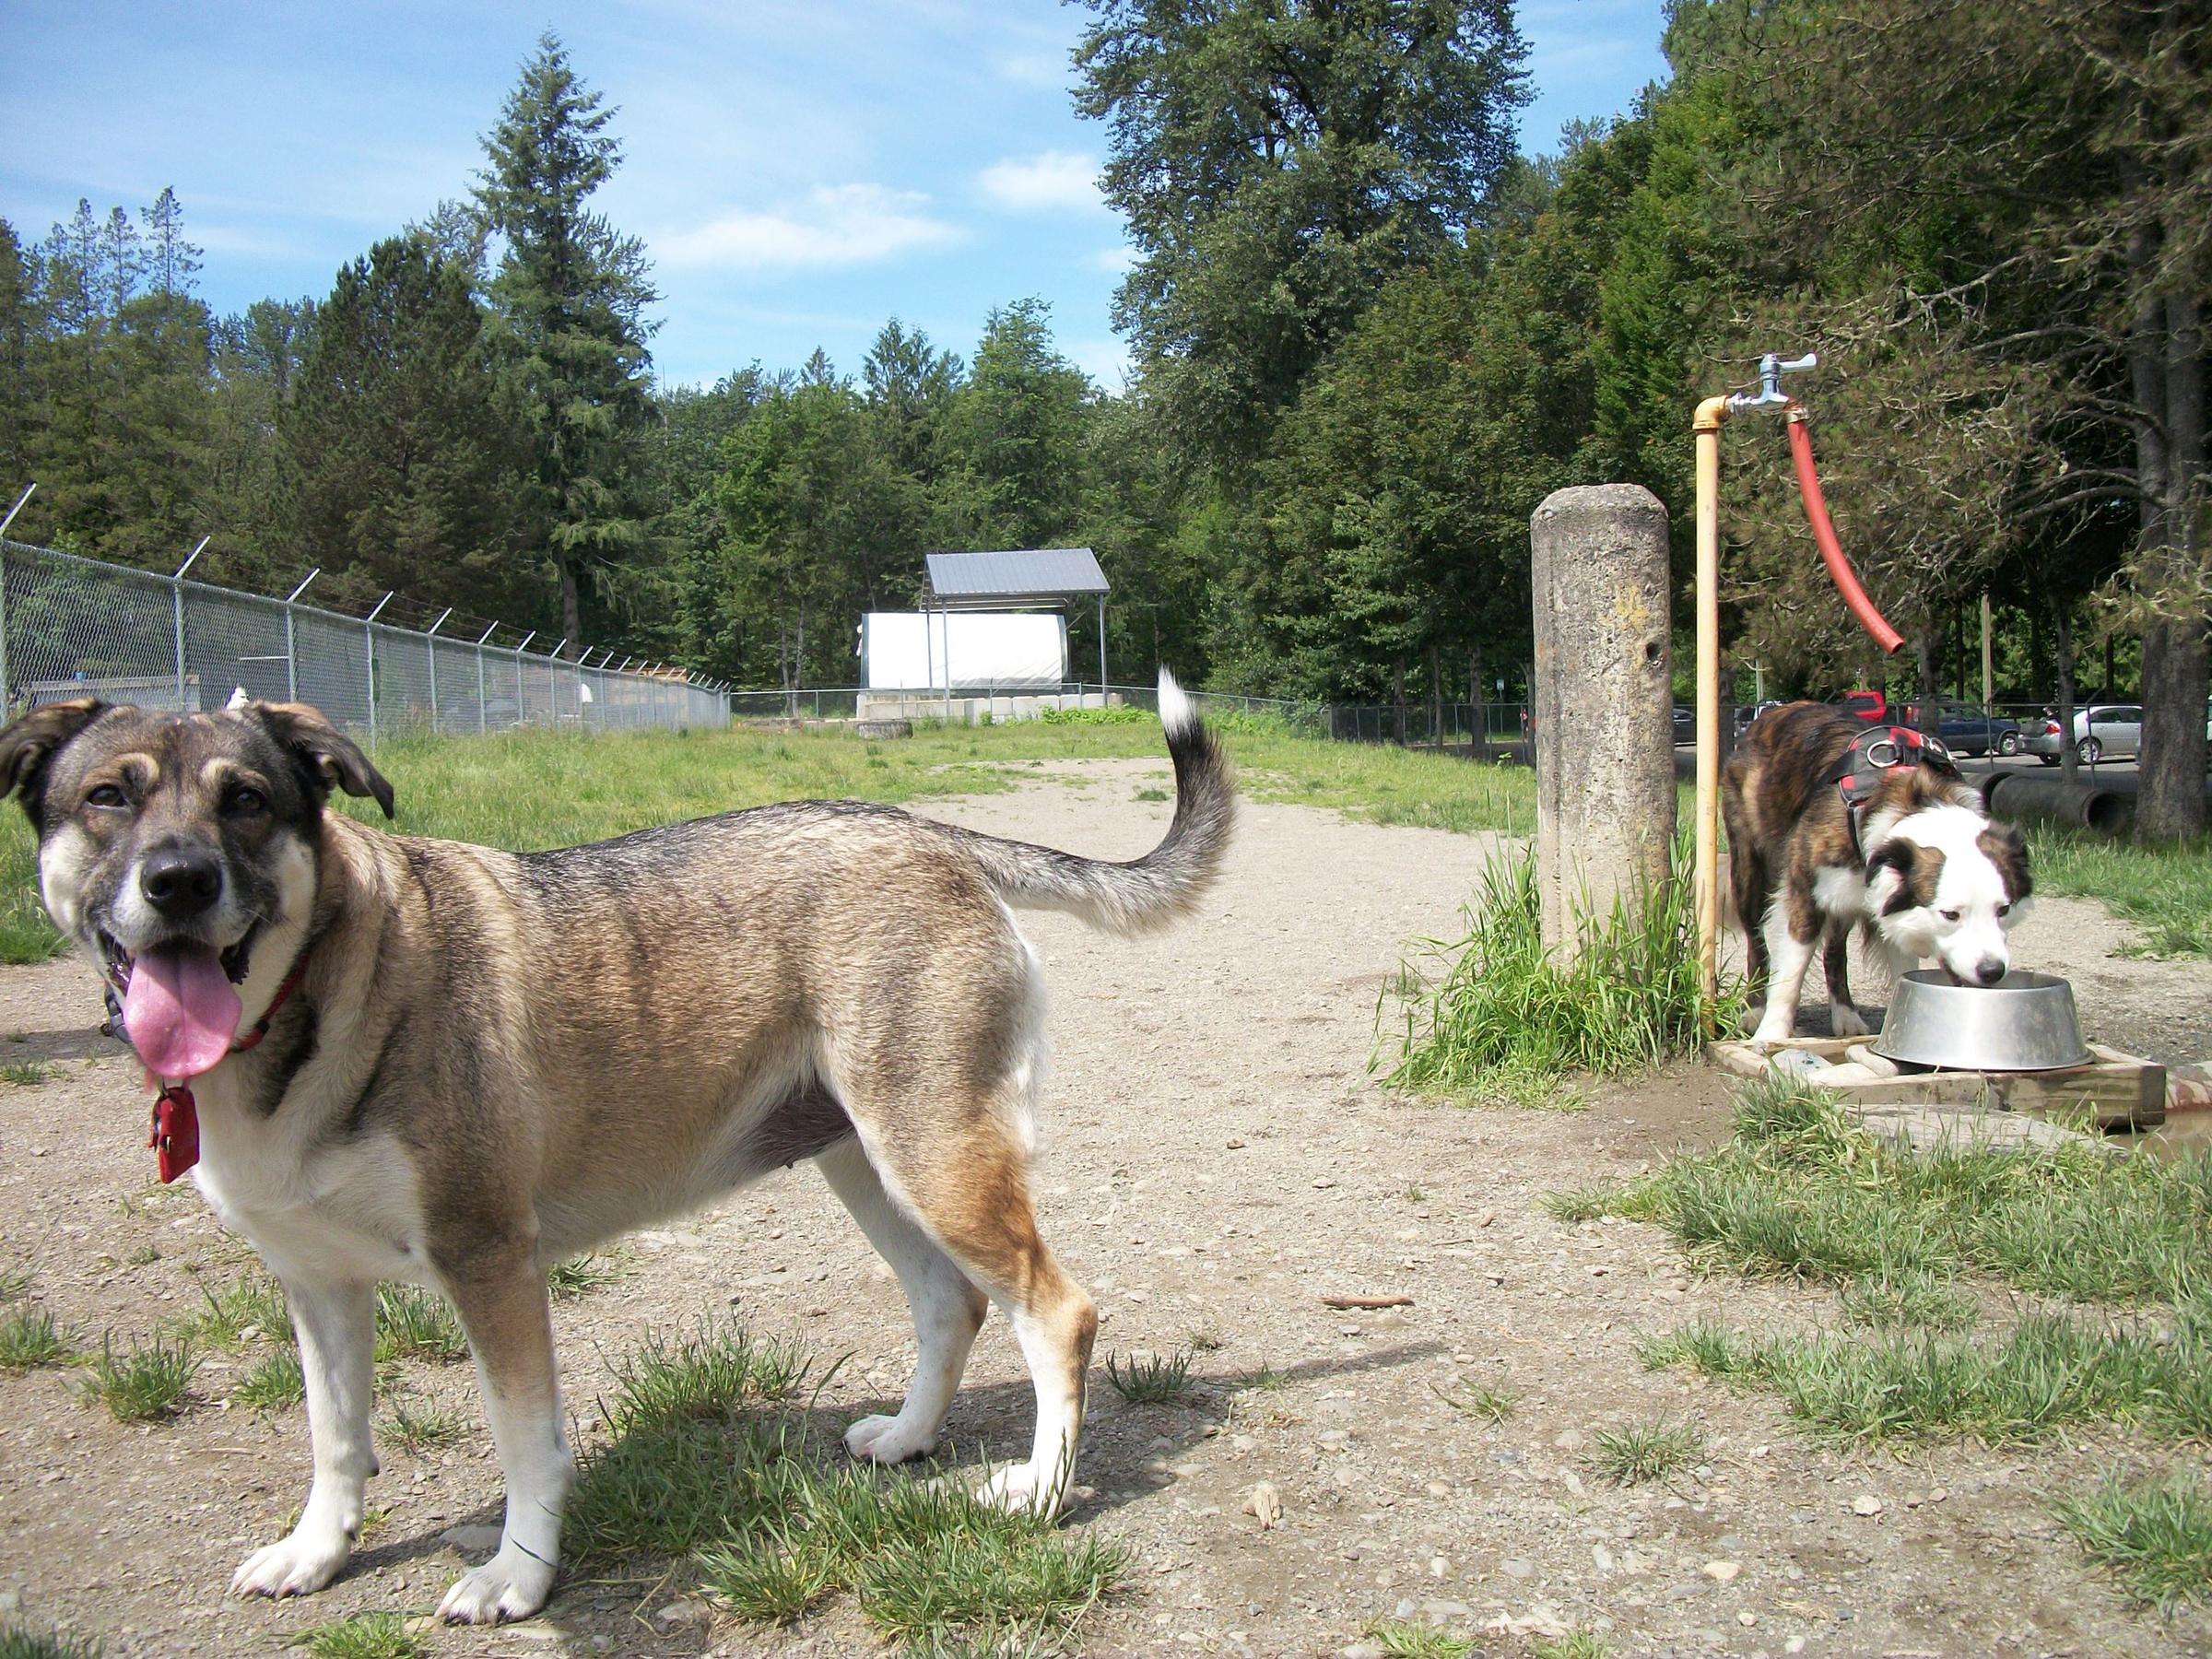 Pet Friendly "Dogs on First" Off-Leash Dog Park